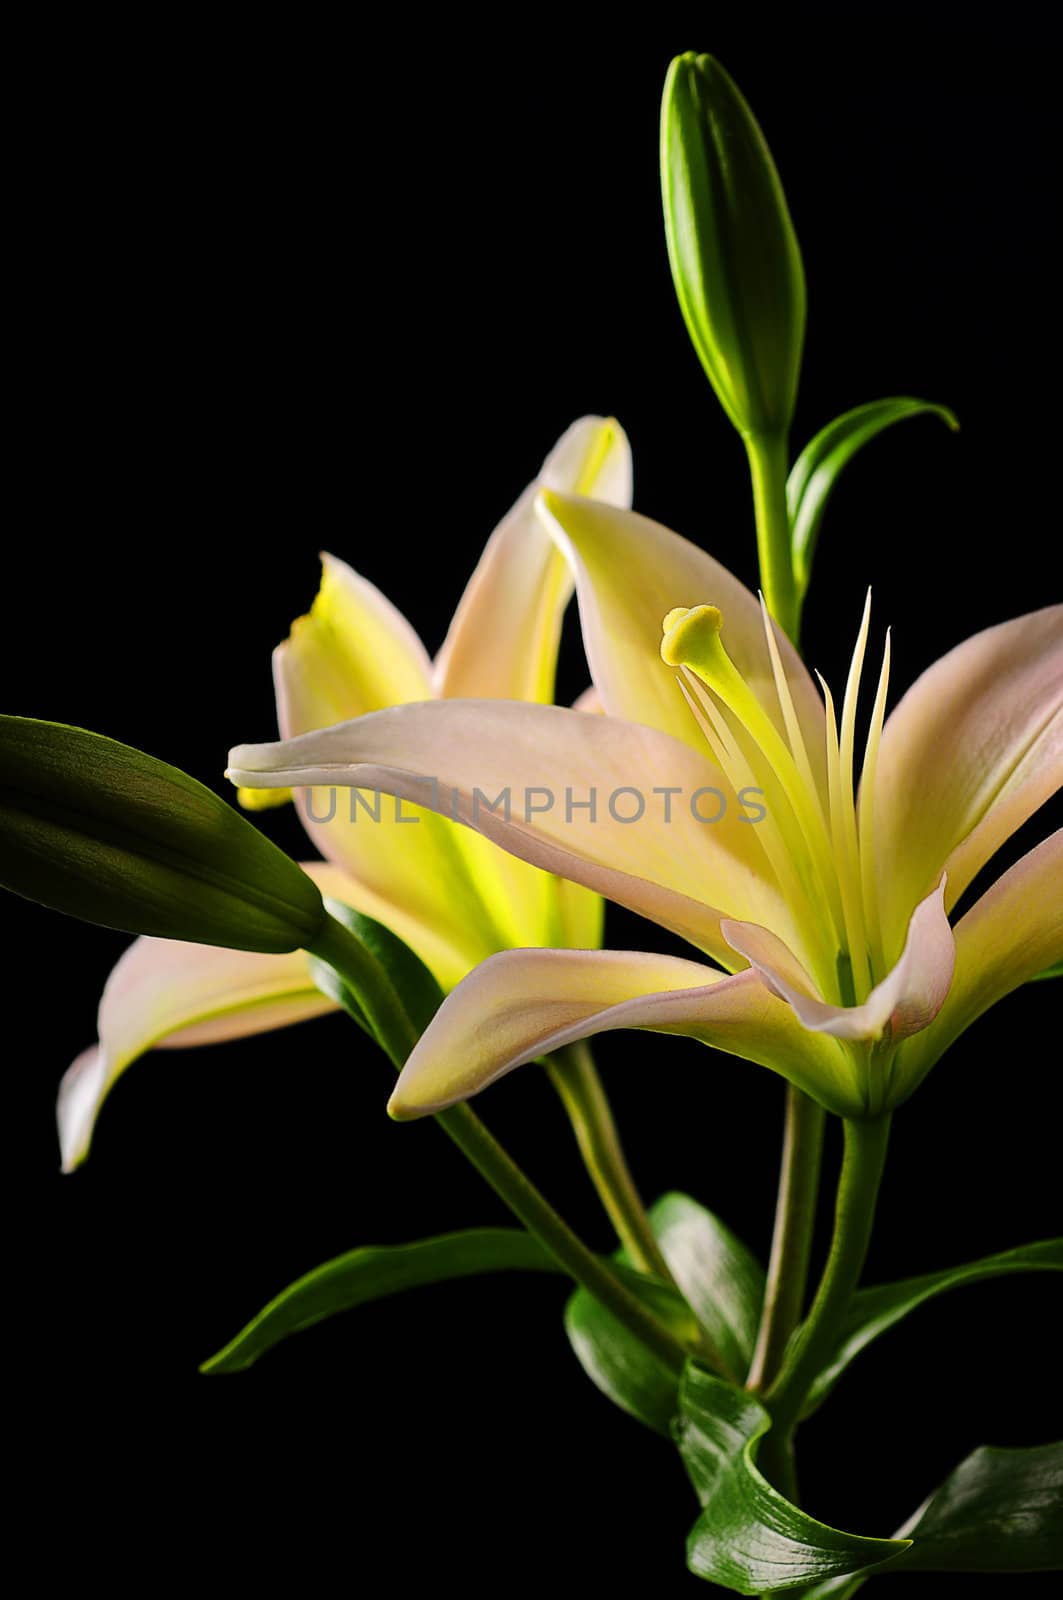 White lilies on black background by ftlaudgirl